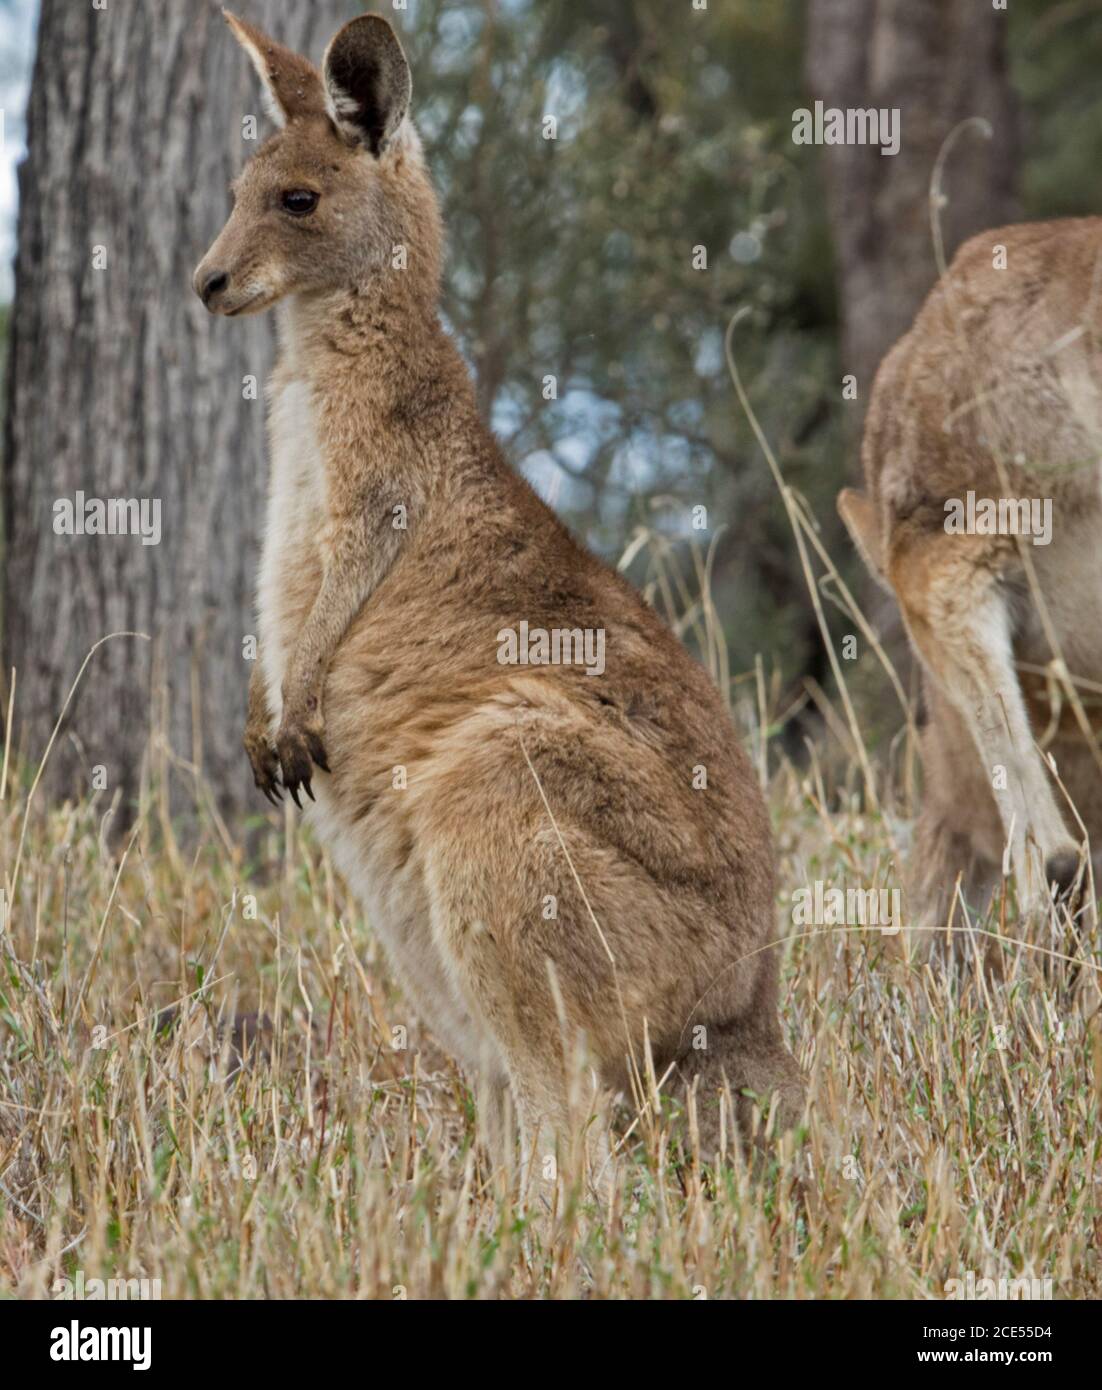 Beautiful Australian Eastern Grey kangaroo, large joey, in the wild, in pensive mood, with background of tall grasses & trees Stock Photo